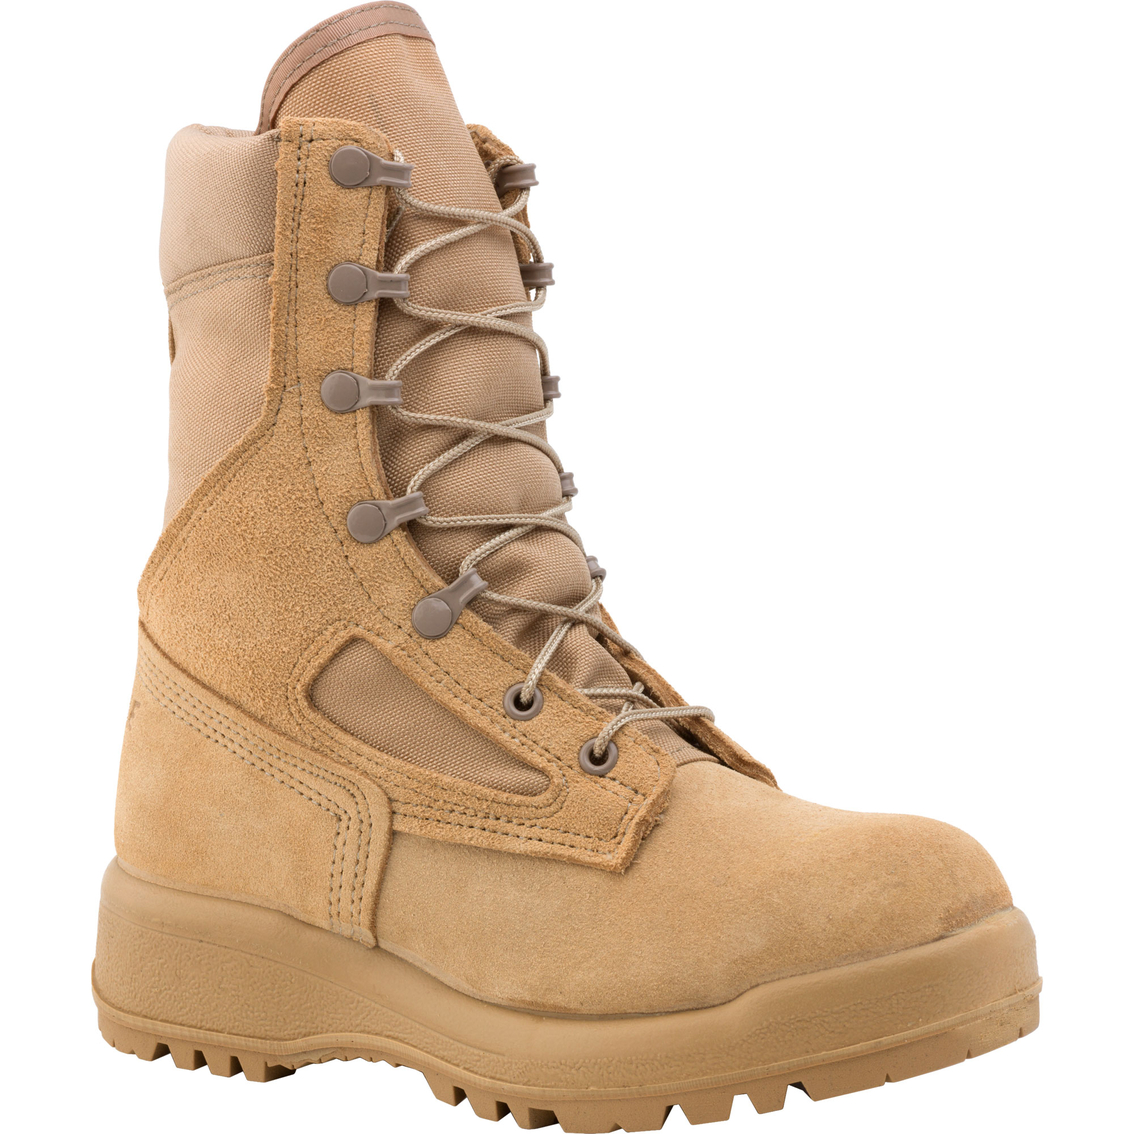 Belleville Hot Weather Flight Boots 340 Military Approved Footwear